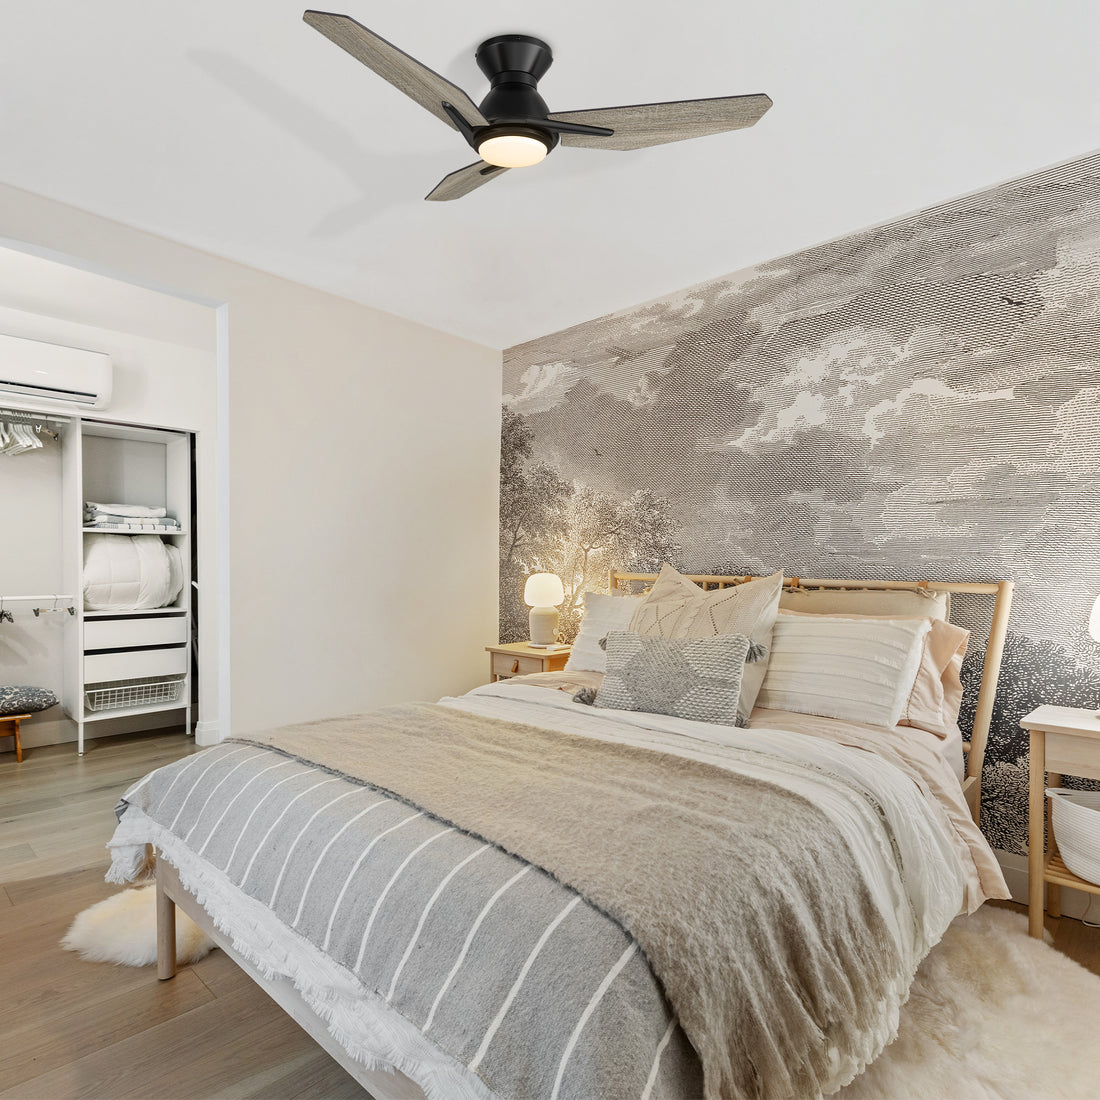 Carro Vant 44 inch ceiling fan with light, low profile design with 3 wooden plywood blades, installed in a bedroom. 